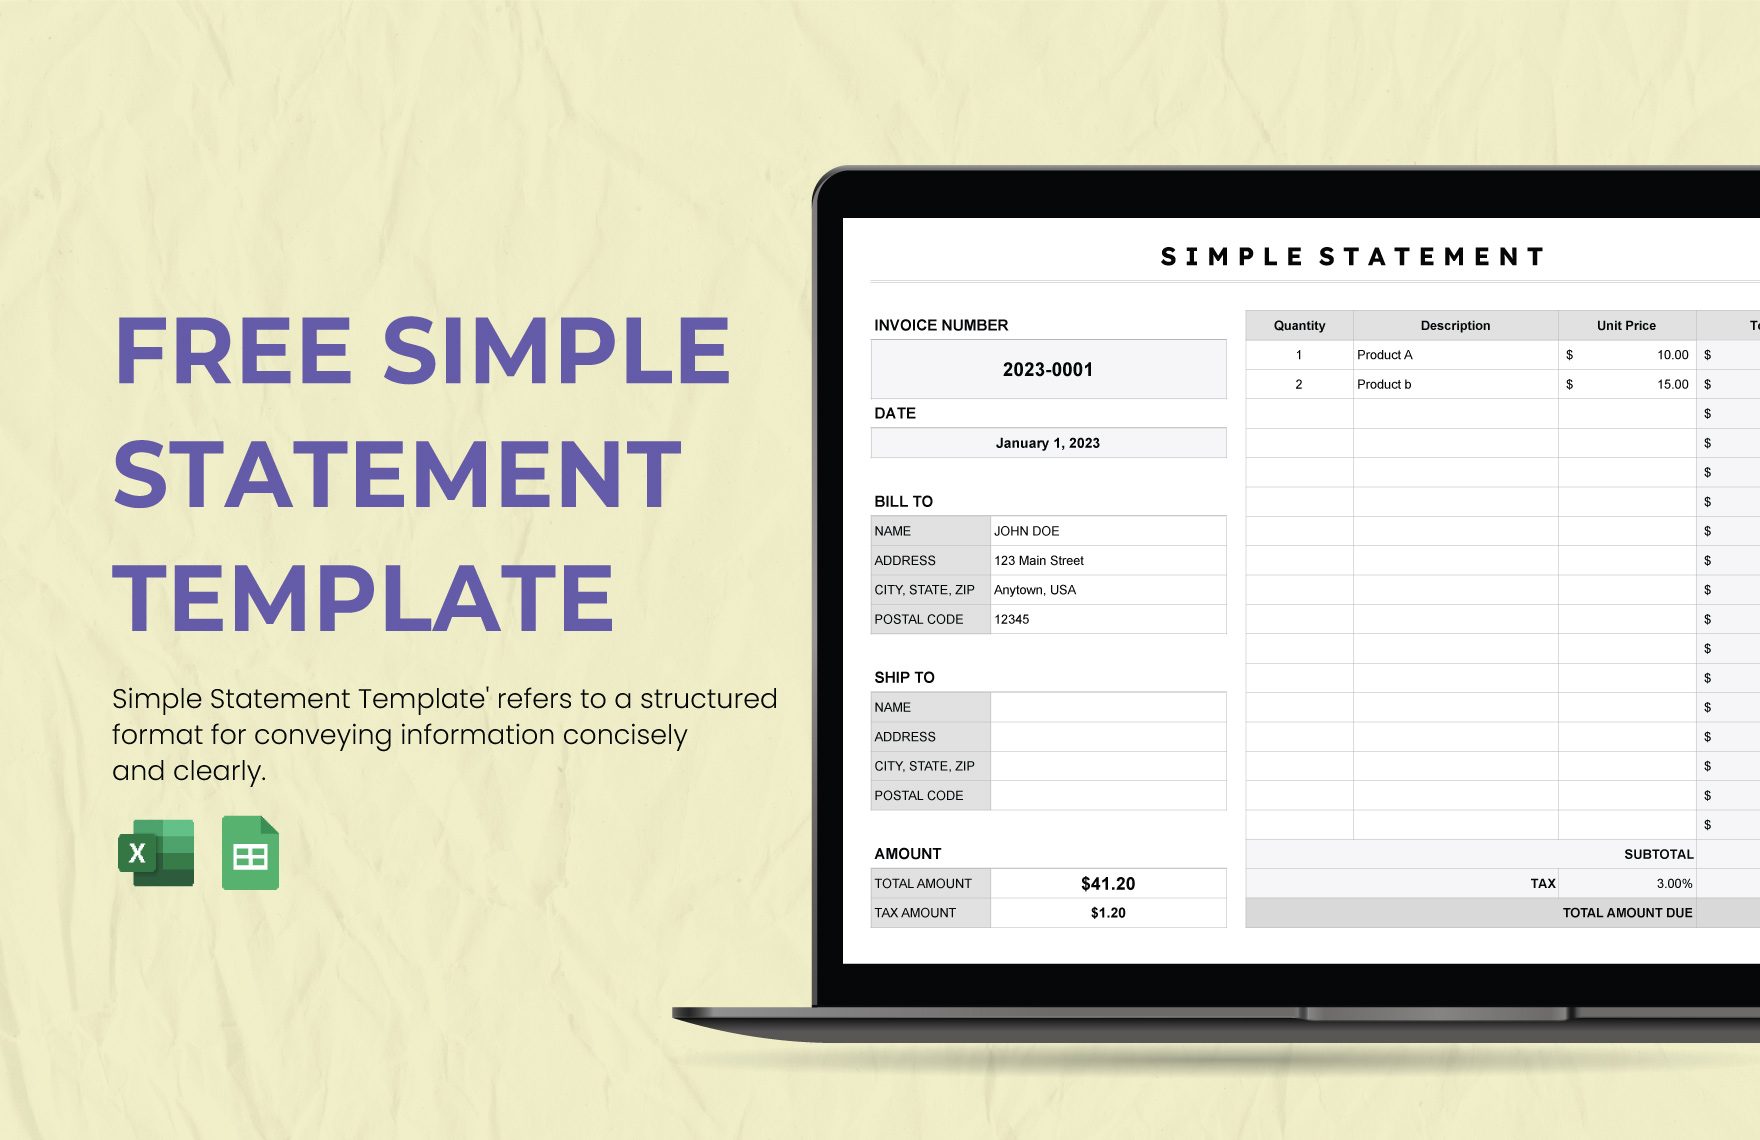 Simple Statement Template